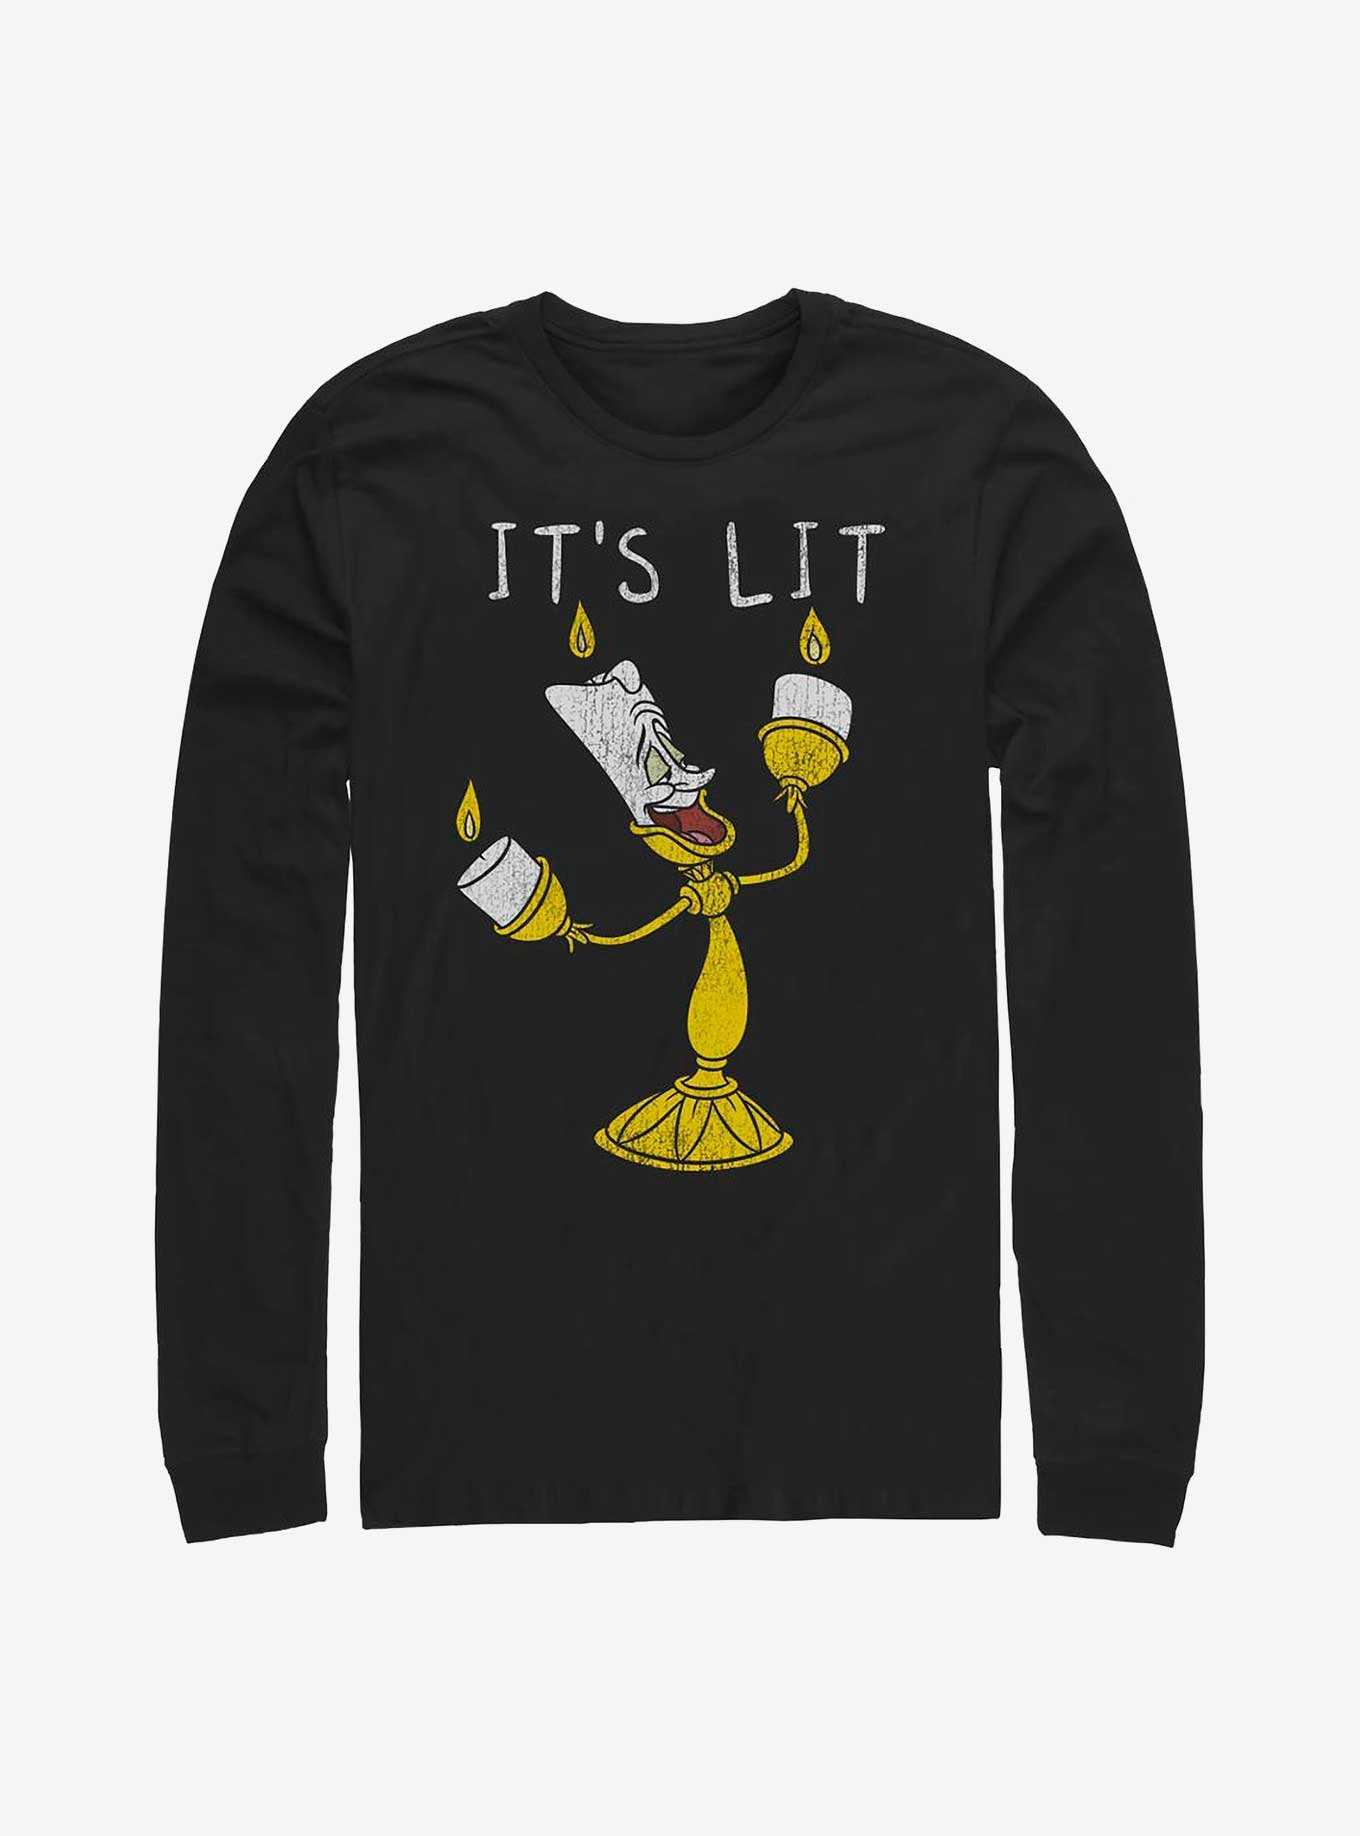 Disney Beauty And The Beast It's Lit Lumiere Long-Sleeve T-Shirt, , hi-res